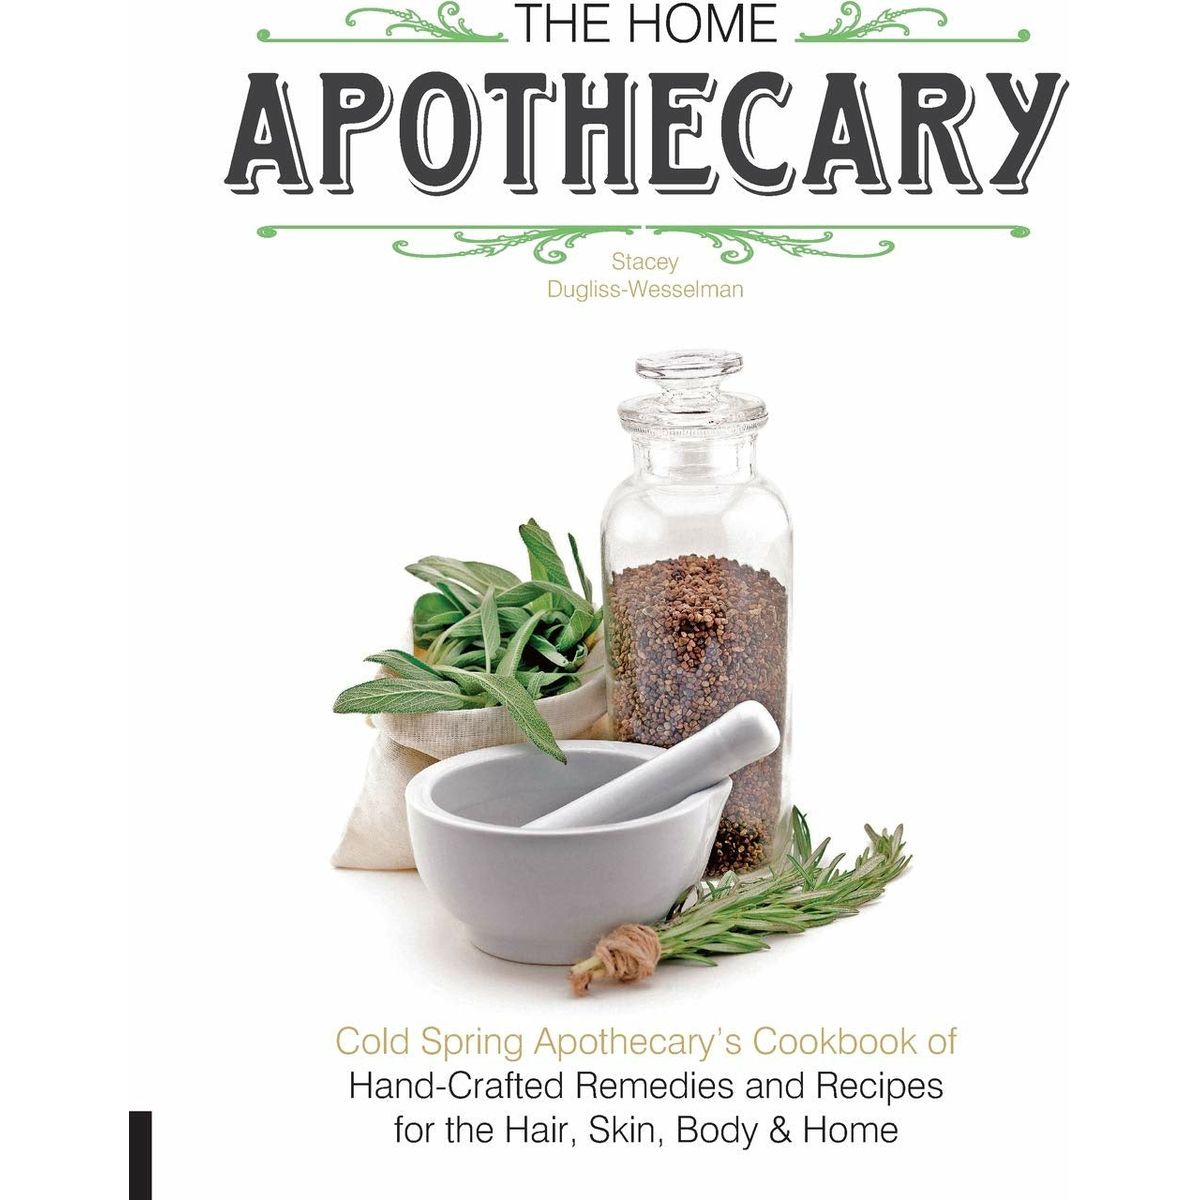 ISBN: 9781592538195 / 1592538193 - The Home Apothecary by Stacey Dugliss-Wesselman [2013]